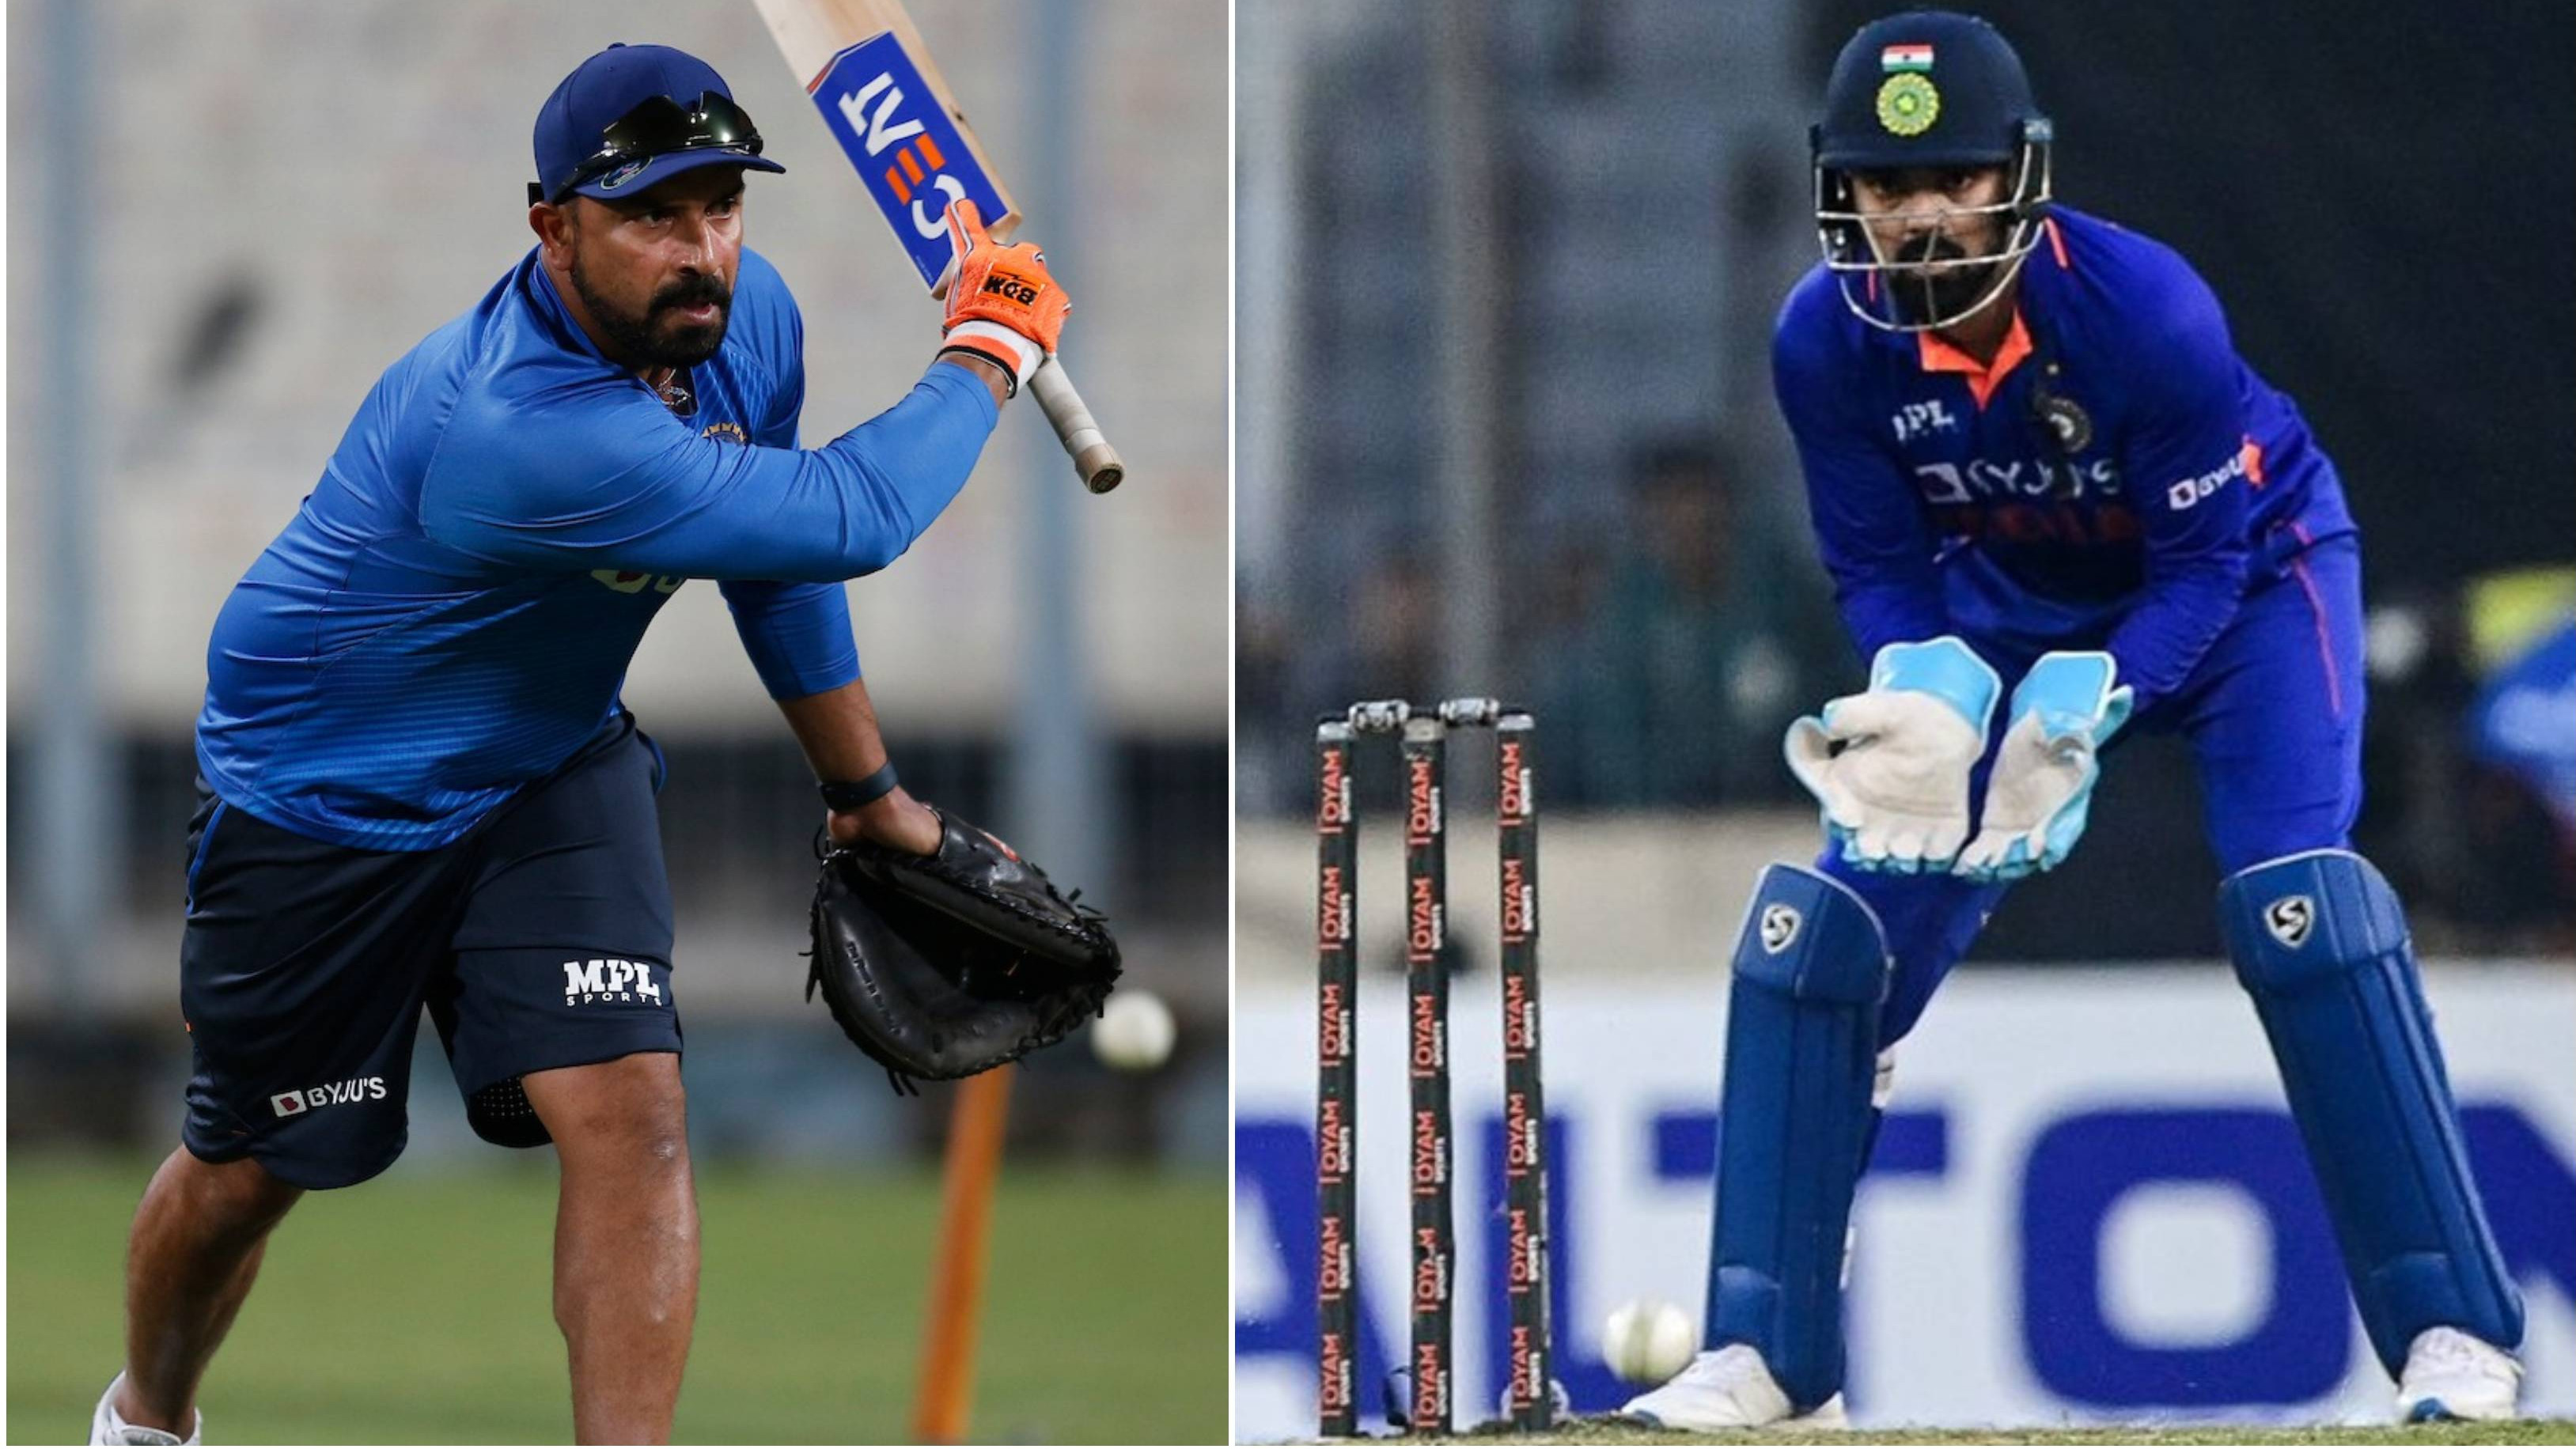 IND v AUS 2023: “He has a proven record,” T Dilip backs KL Rahul to do well in ODIs as a middle-order batter